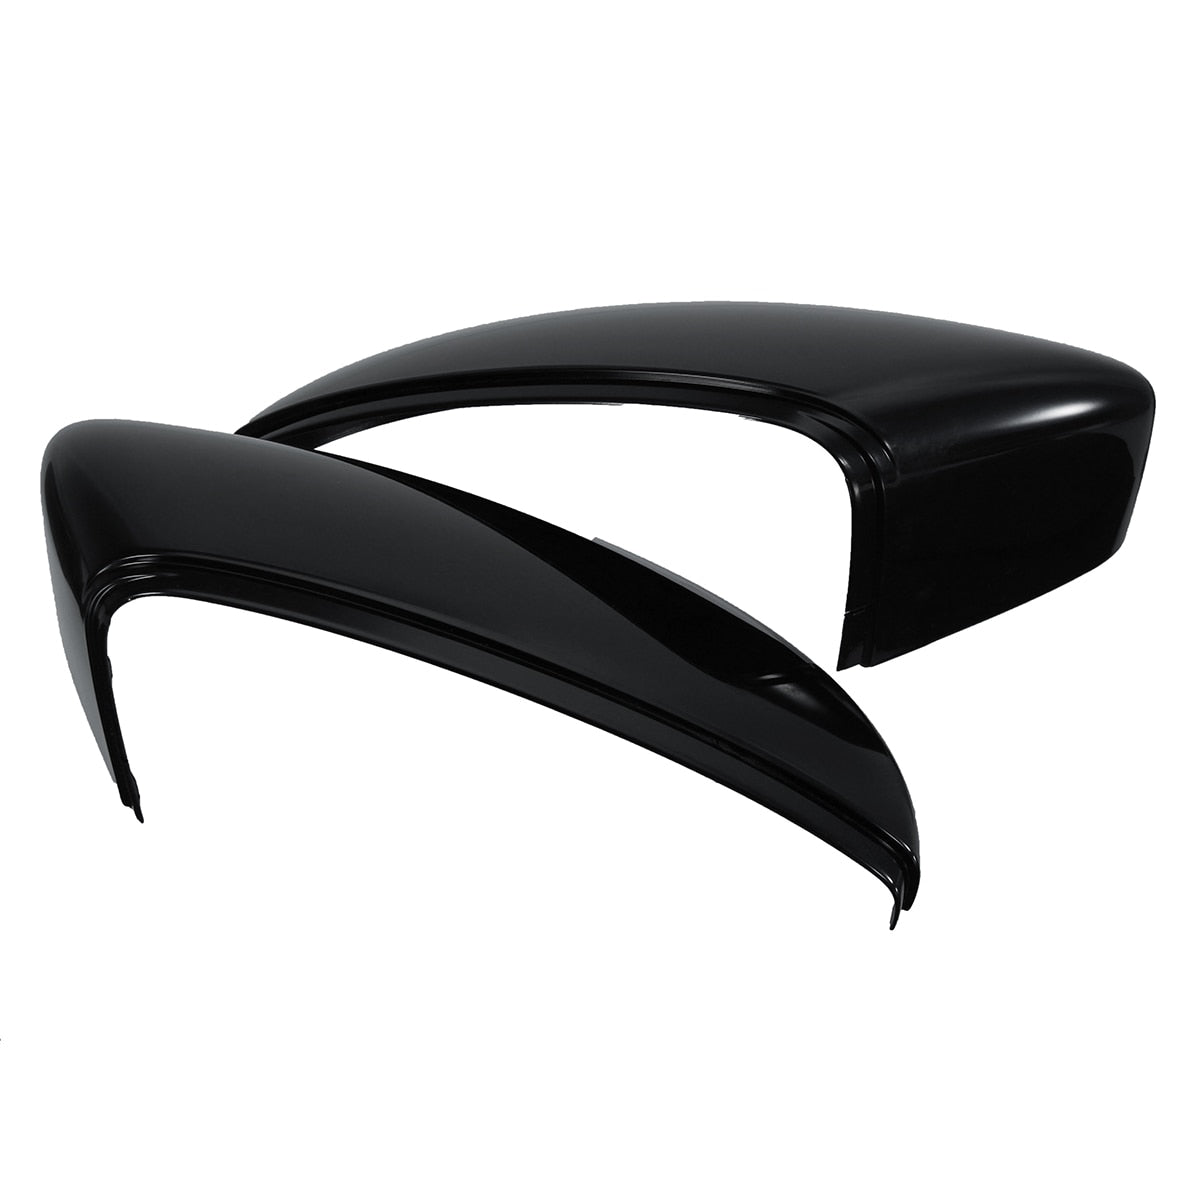 RIGHT side Rear View Wing Mirror Cover Cap For VW Beetle CC Eos Passat Jetta Scirocco